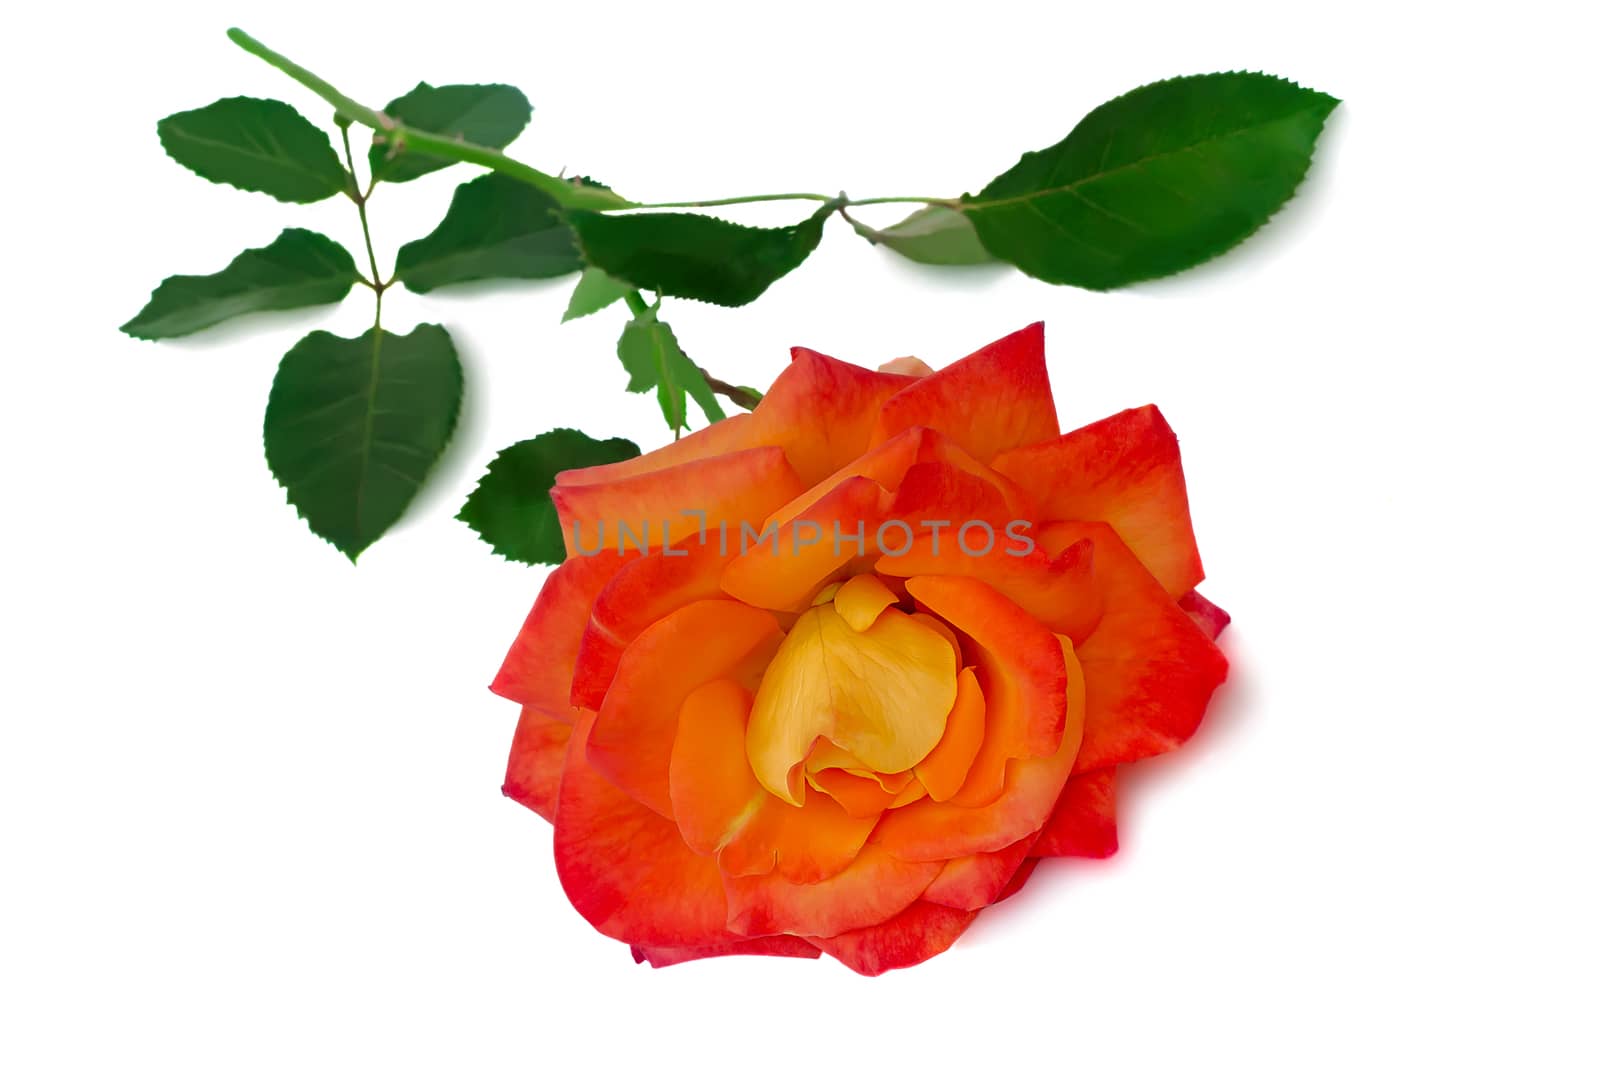 Big beautiful red rose leafs. Presented on a white background